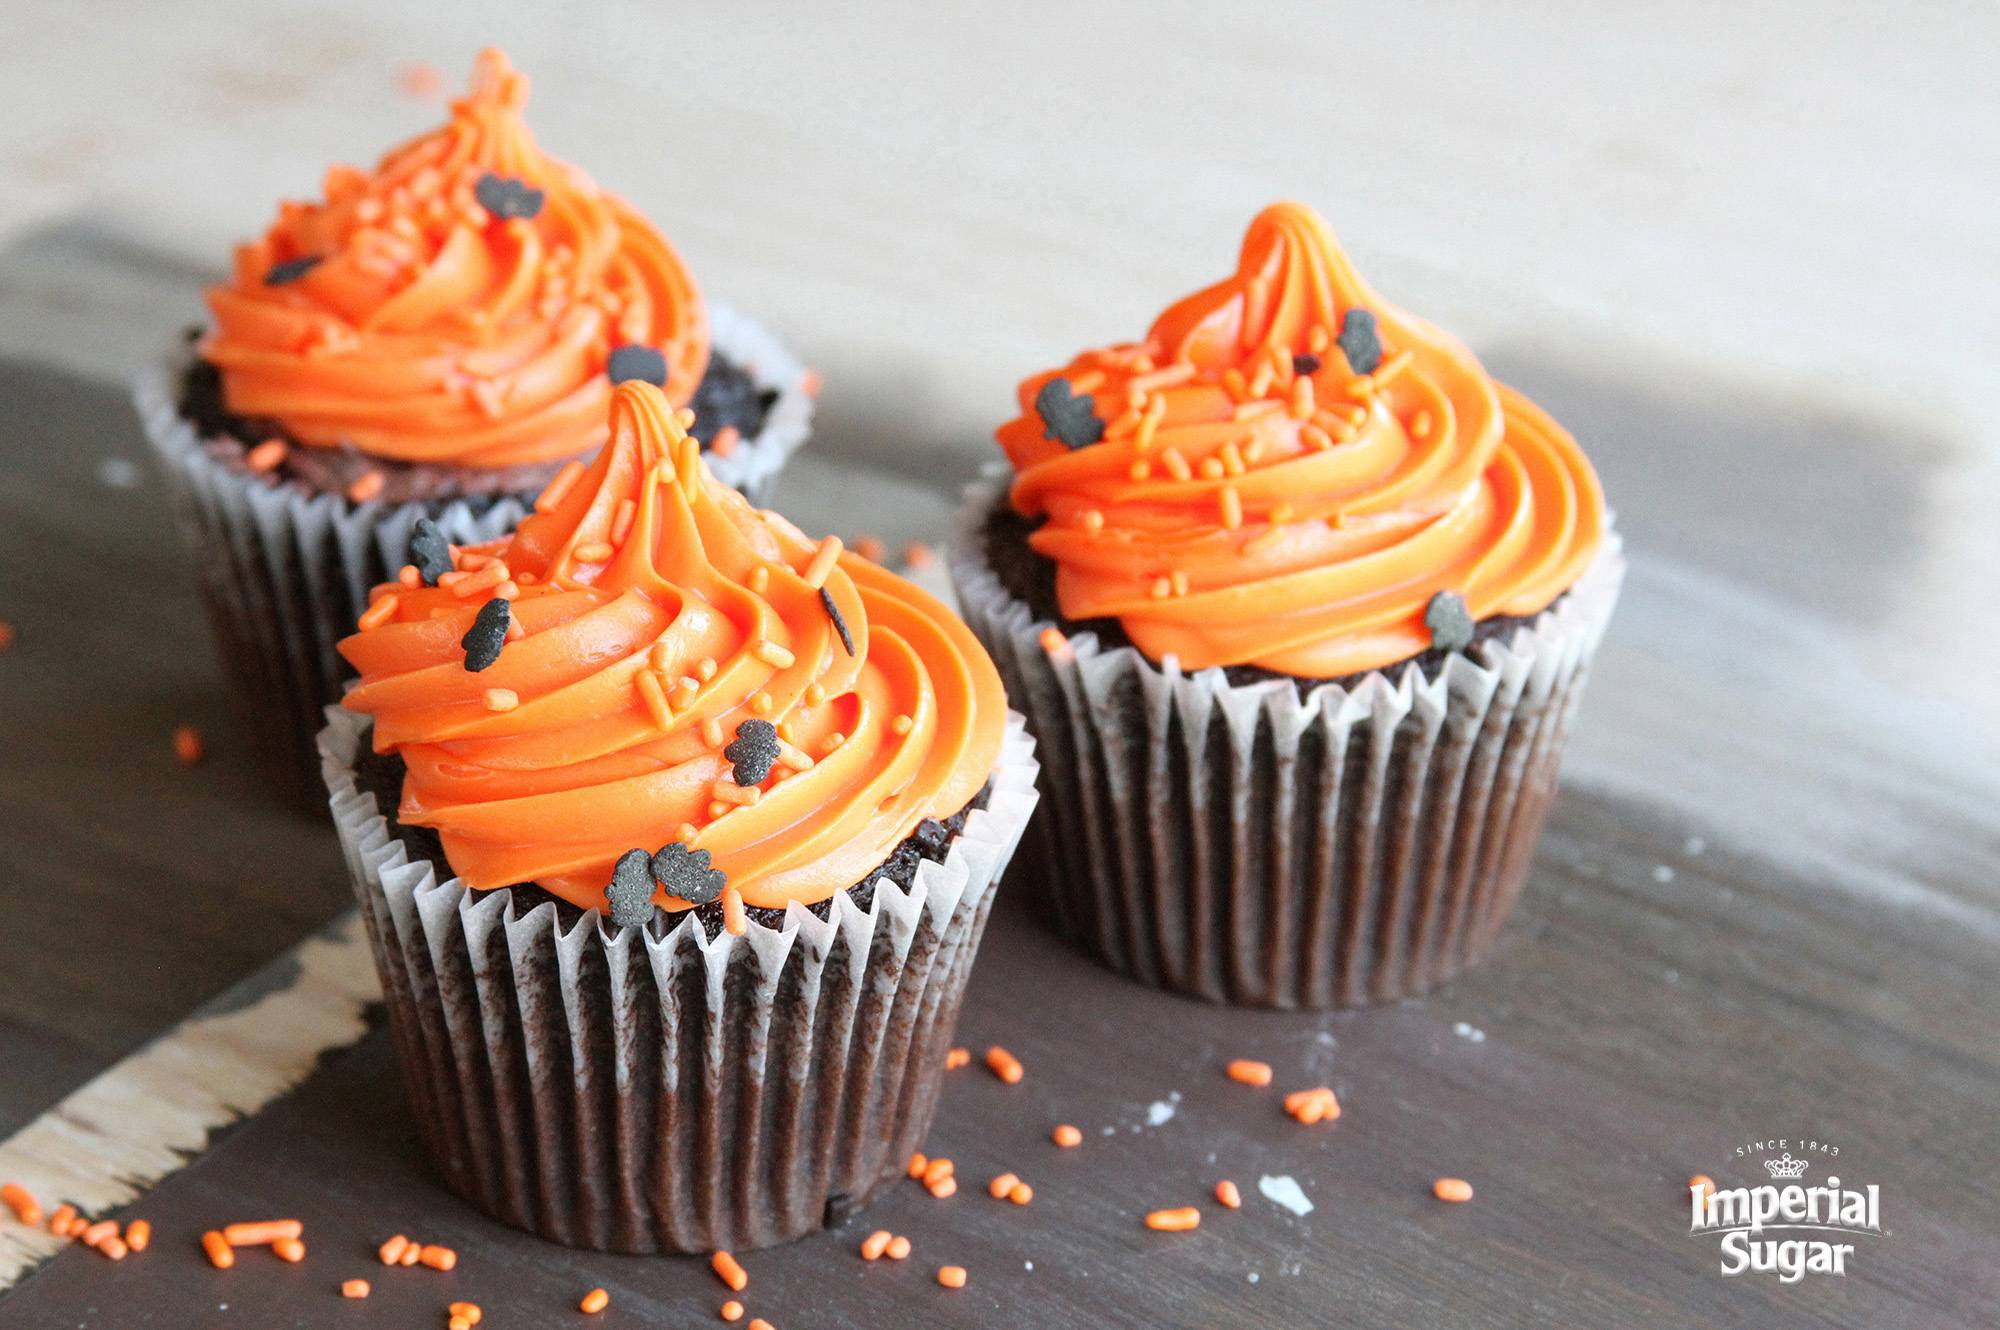 VIDEO: DIY fondant is easy, inexpensive and perfect for Halloween cupcakes